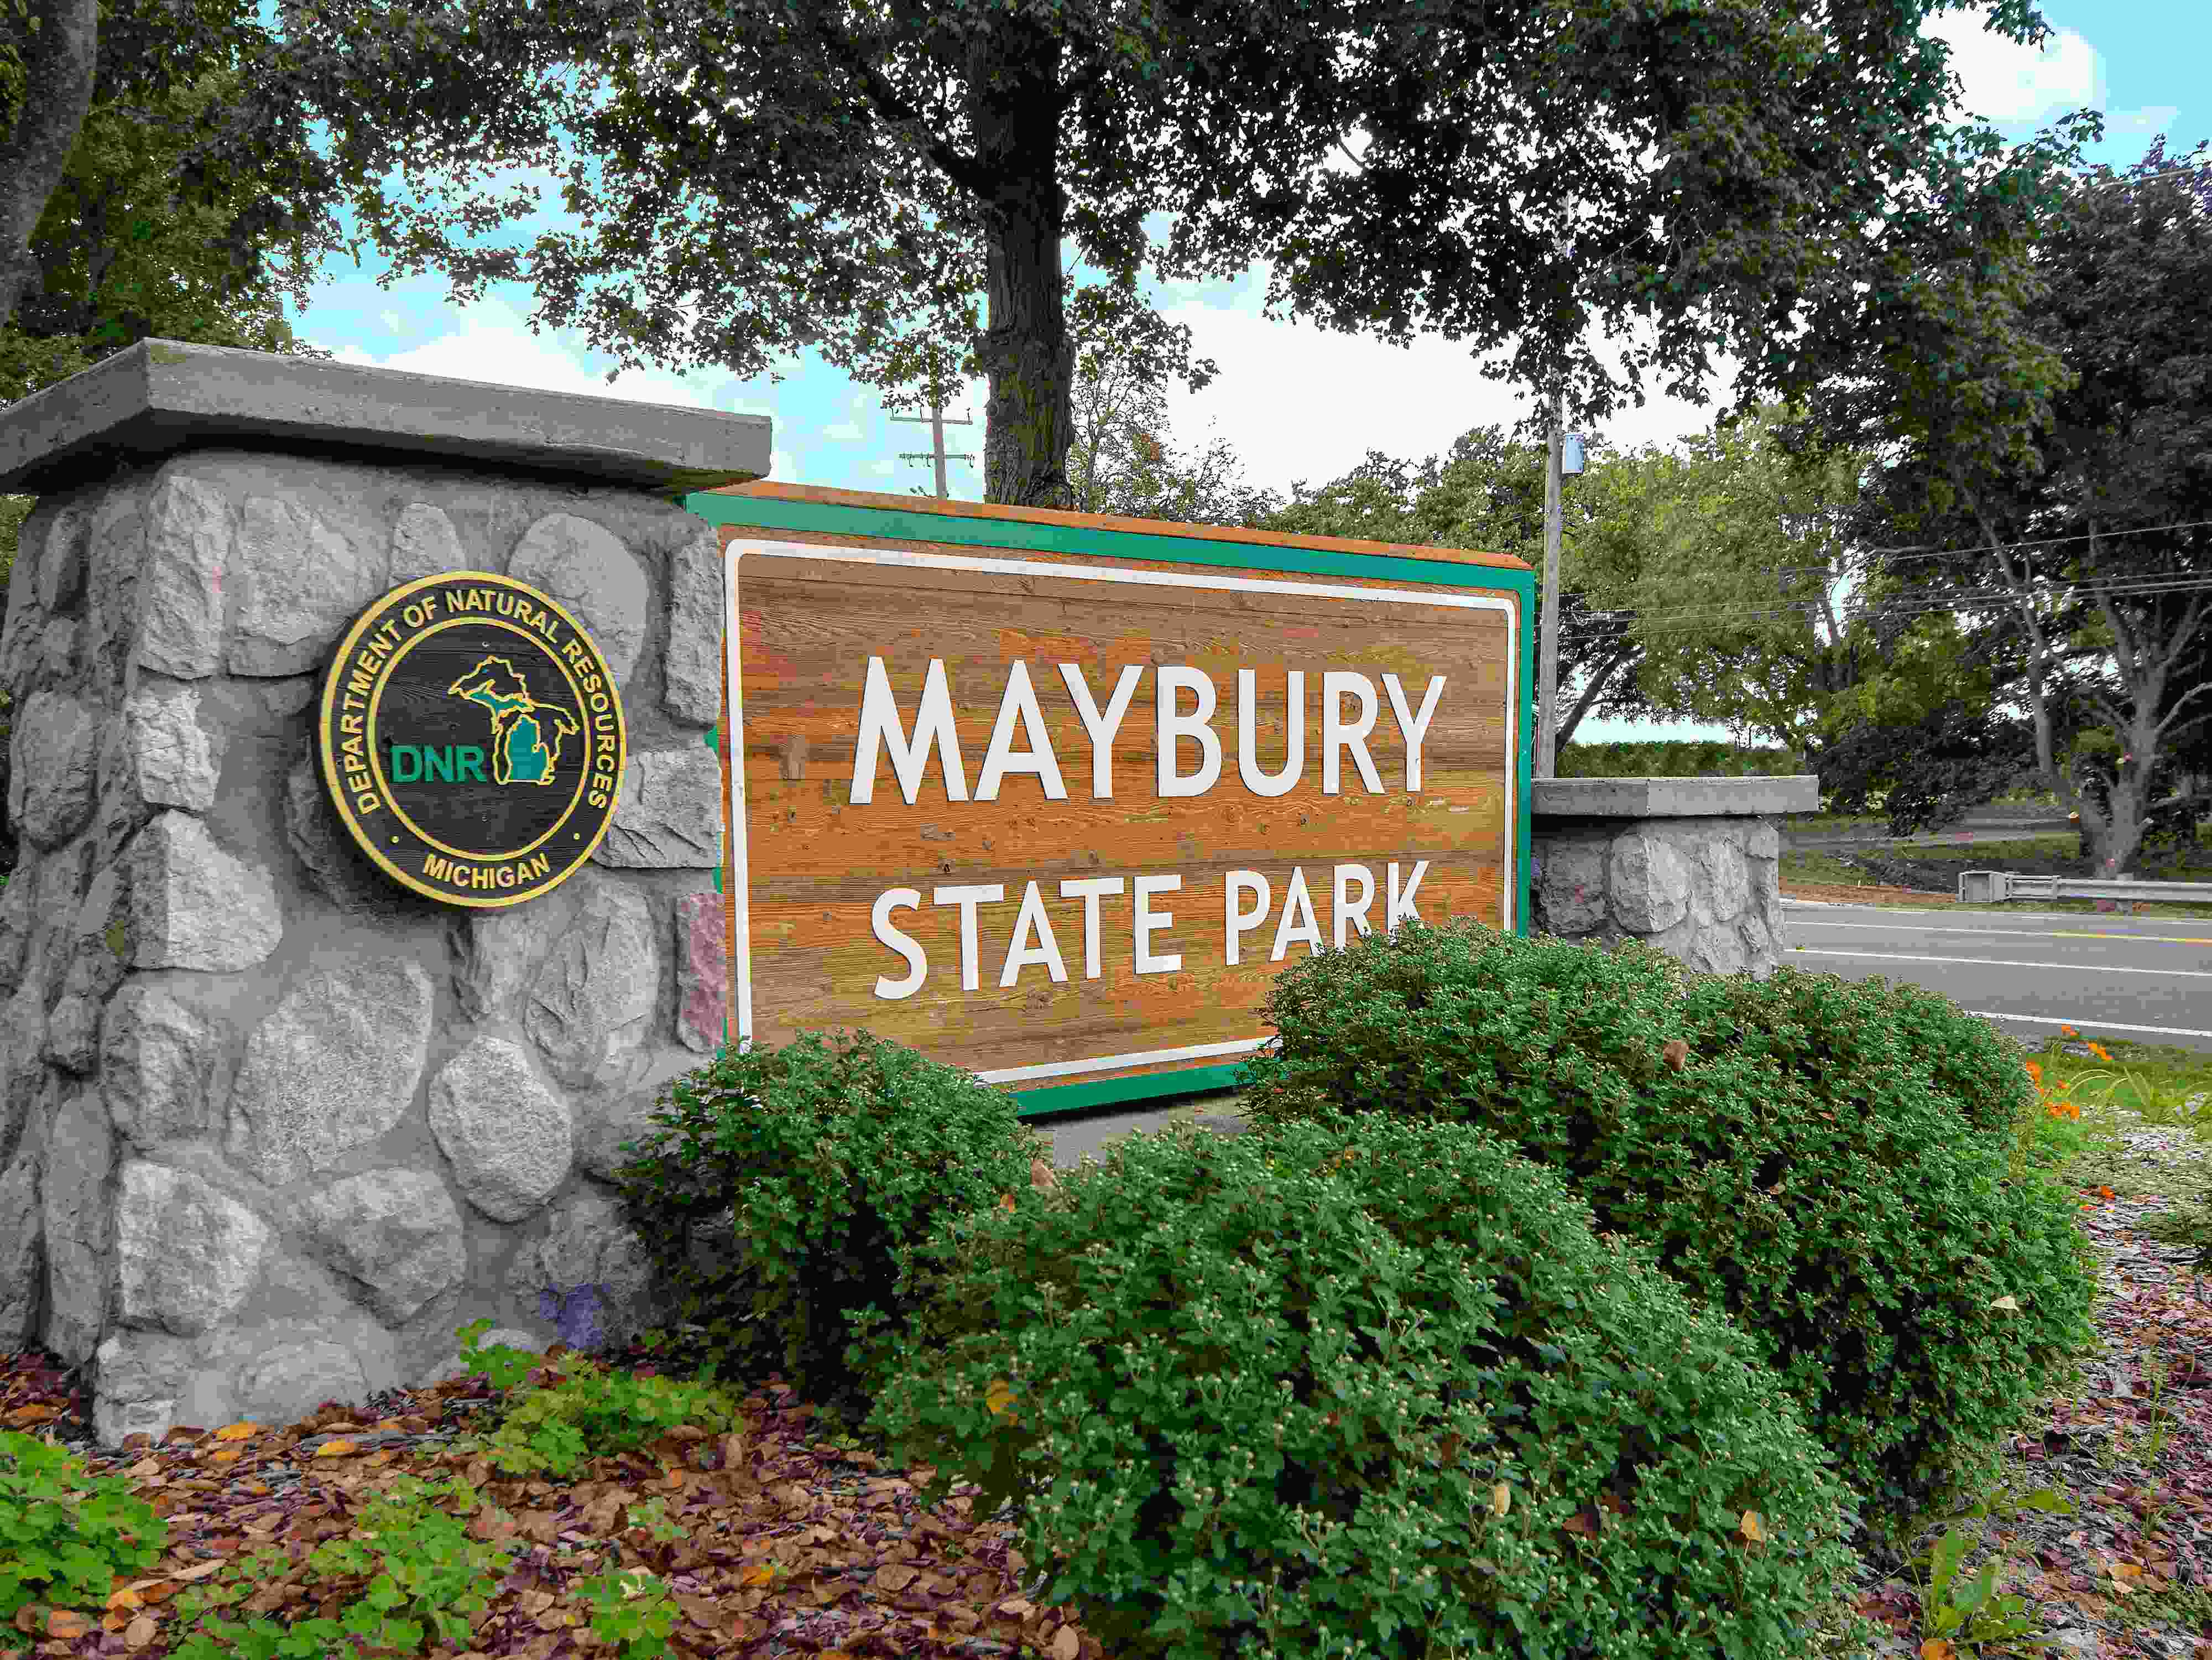 Explore the trails of Maybury State Park.